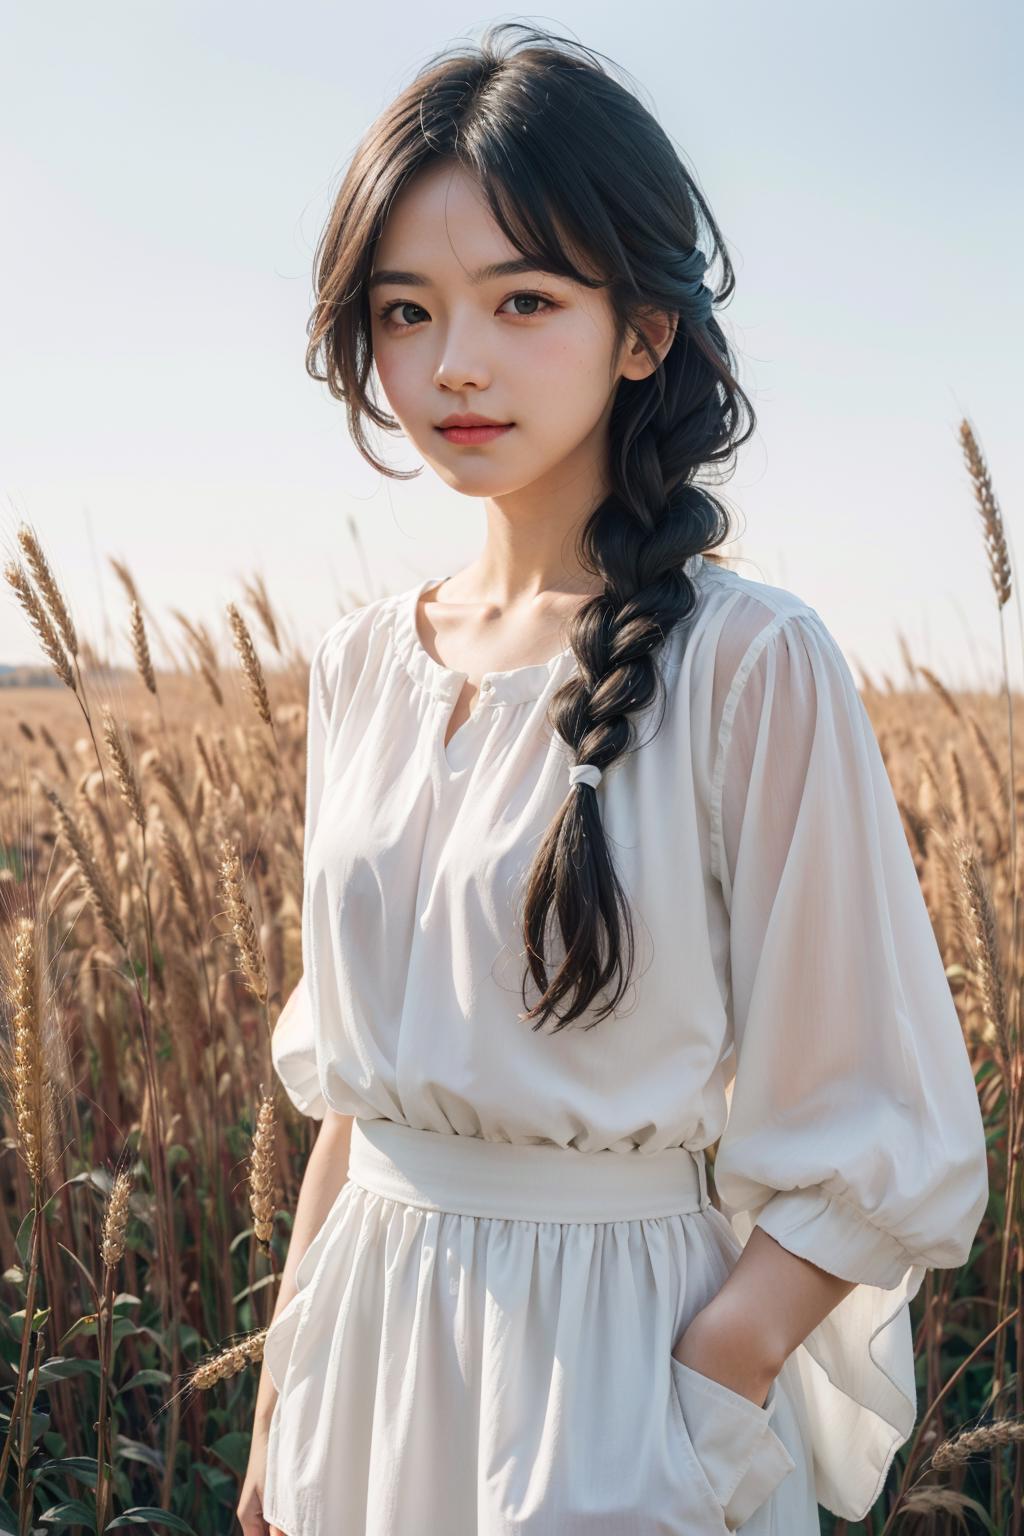 A woman with long dark hair wearing a white dress and braids poses in front of a field of tall grass.